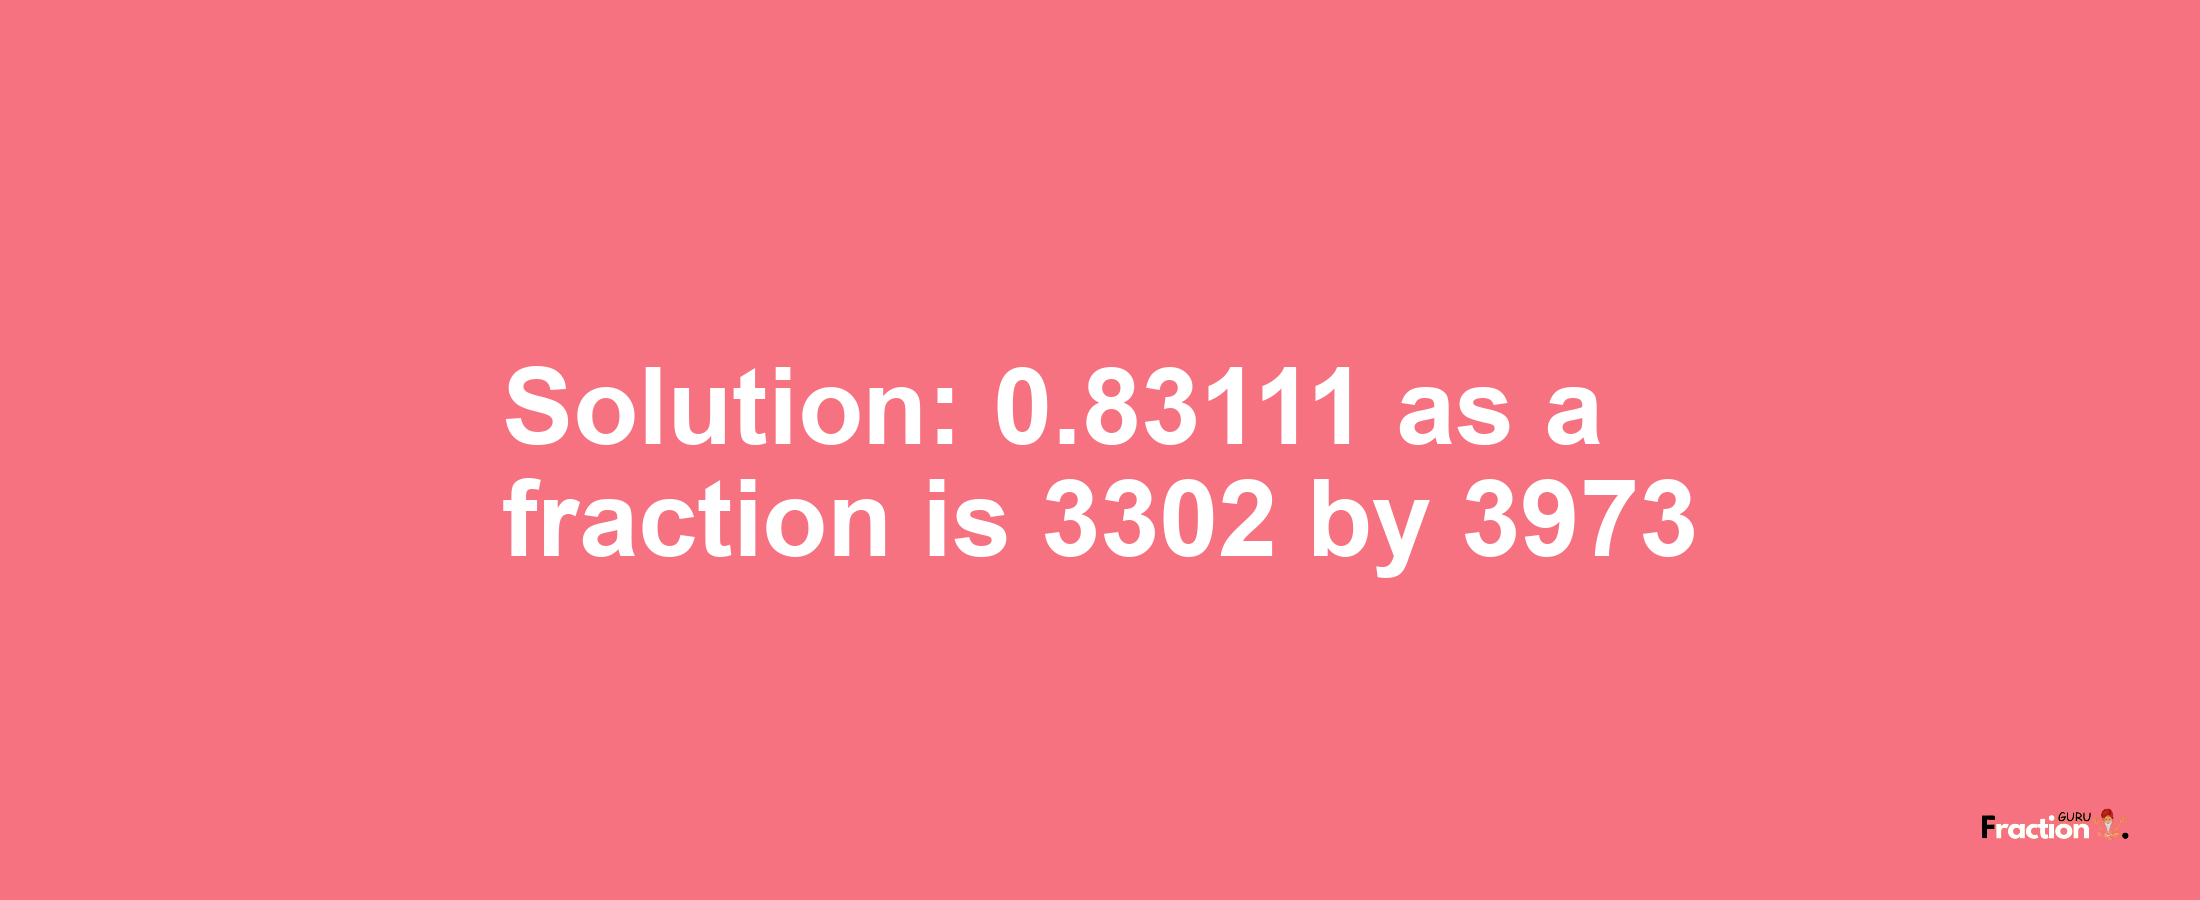 Solution:0.83111 as a fraction is 3302/3973